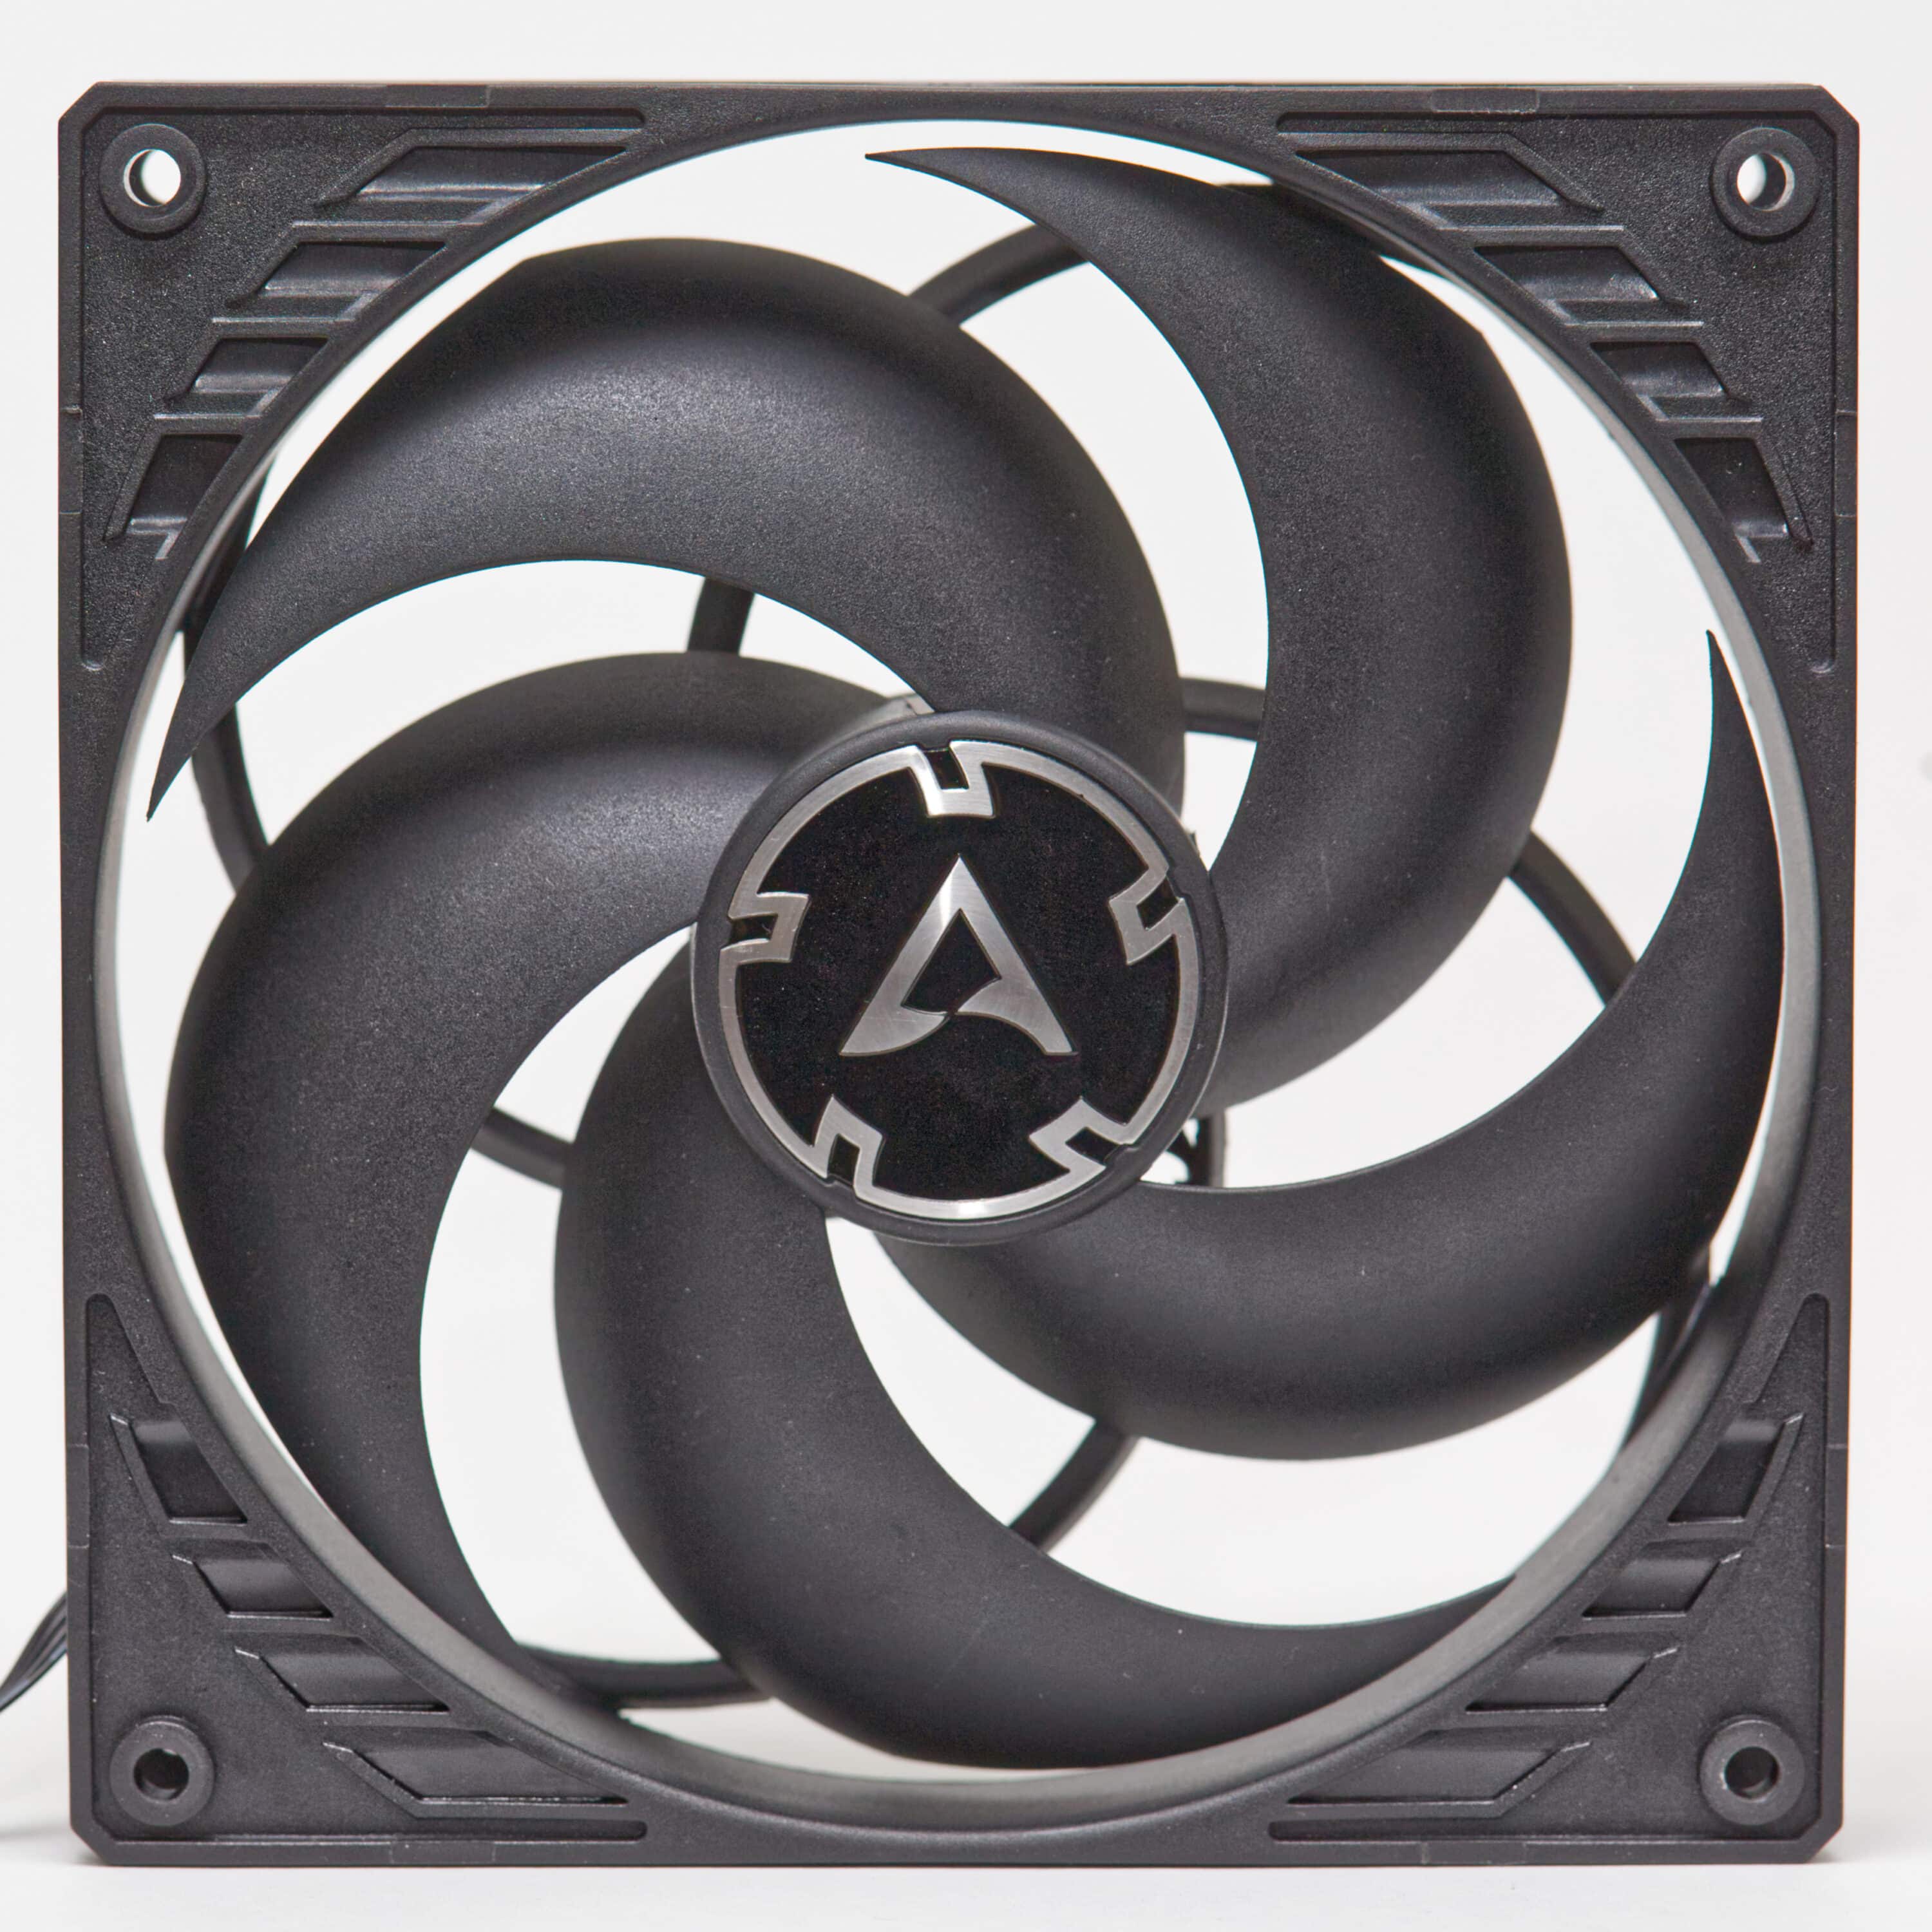 Arctic F14 PWM PST review - 140 mm fan with price-performance crown?